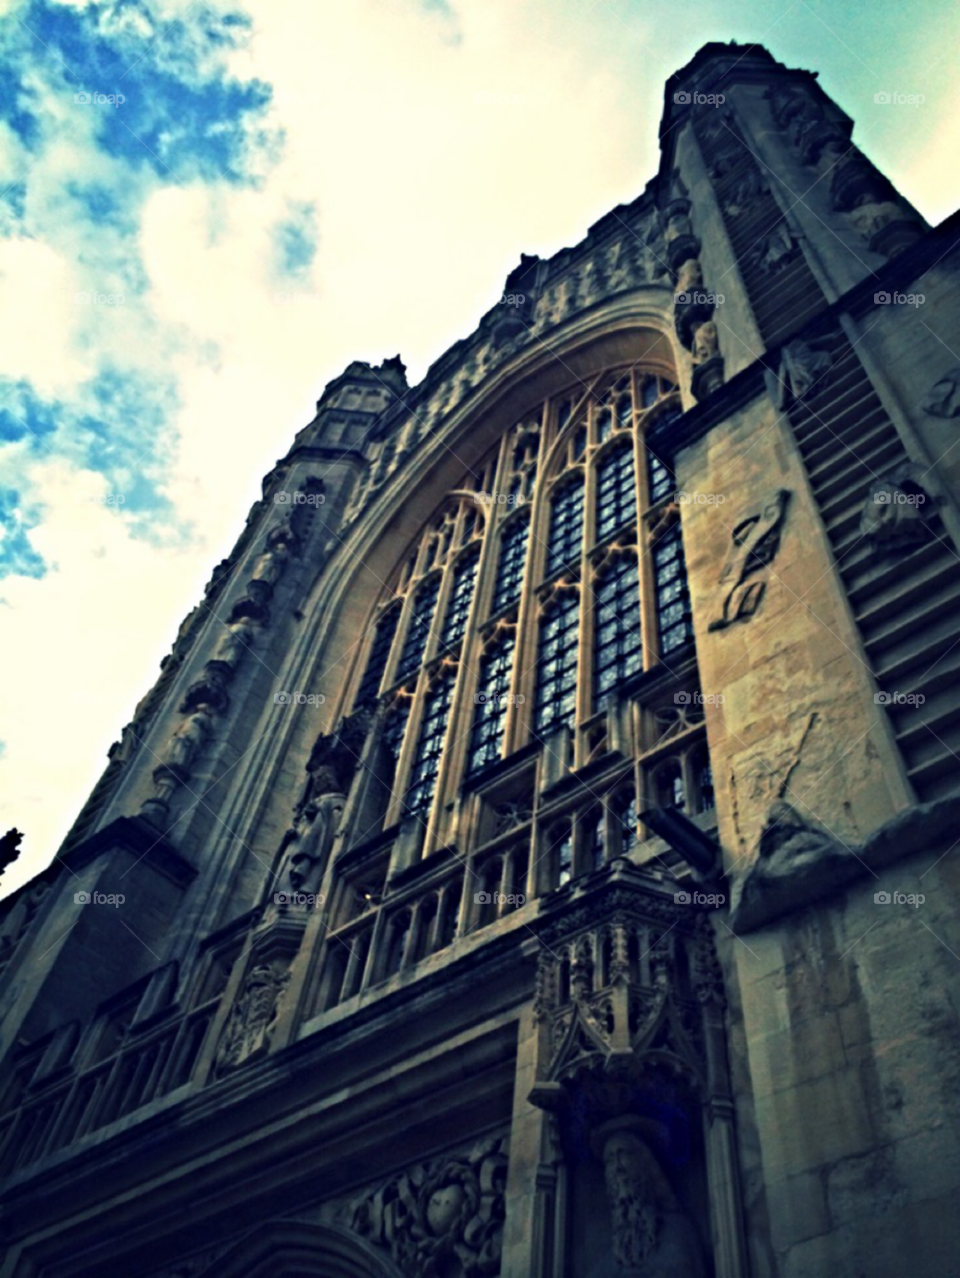 Bath Cathedral. The main church in the town square of bath England! 